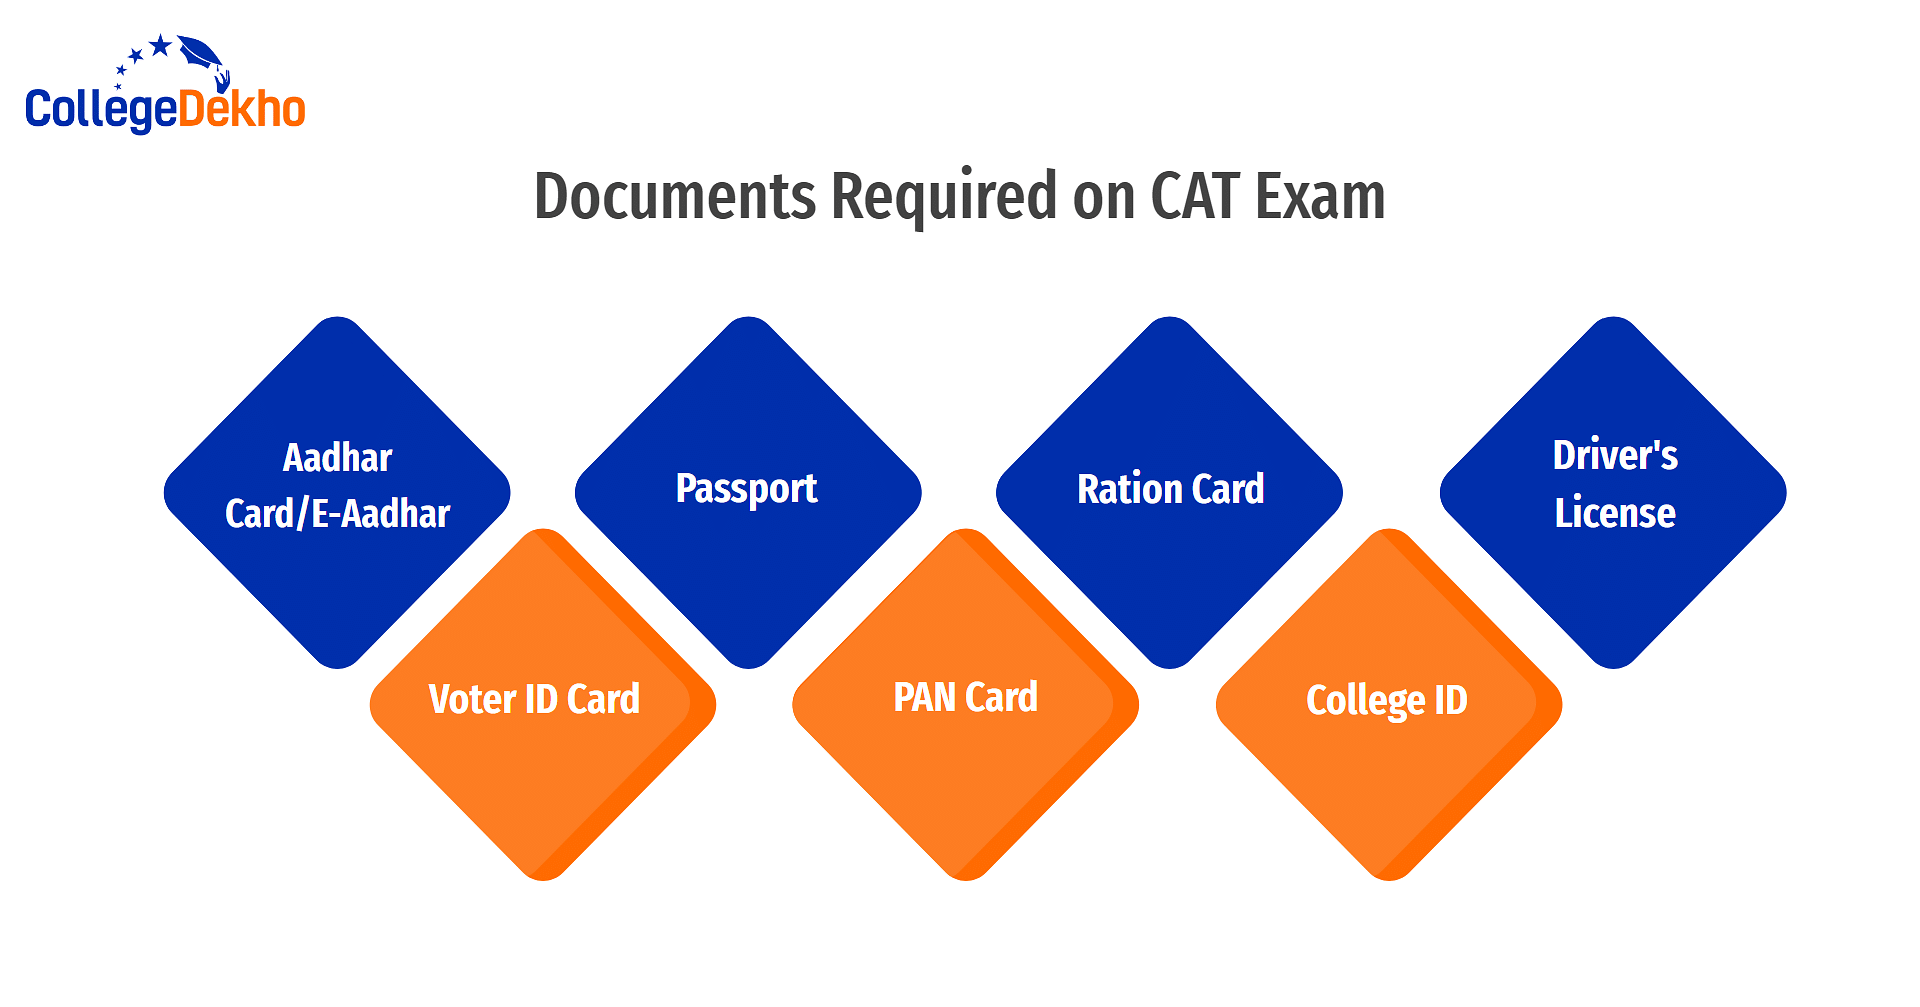 Documents Required on CAT Exam